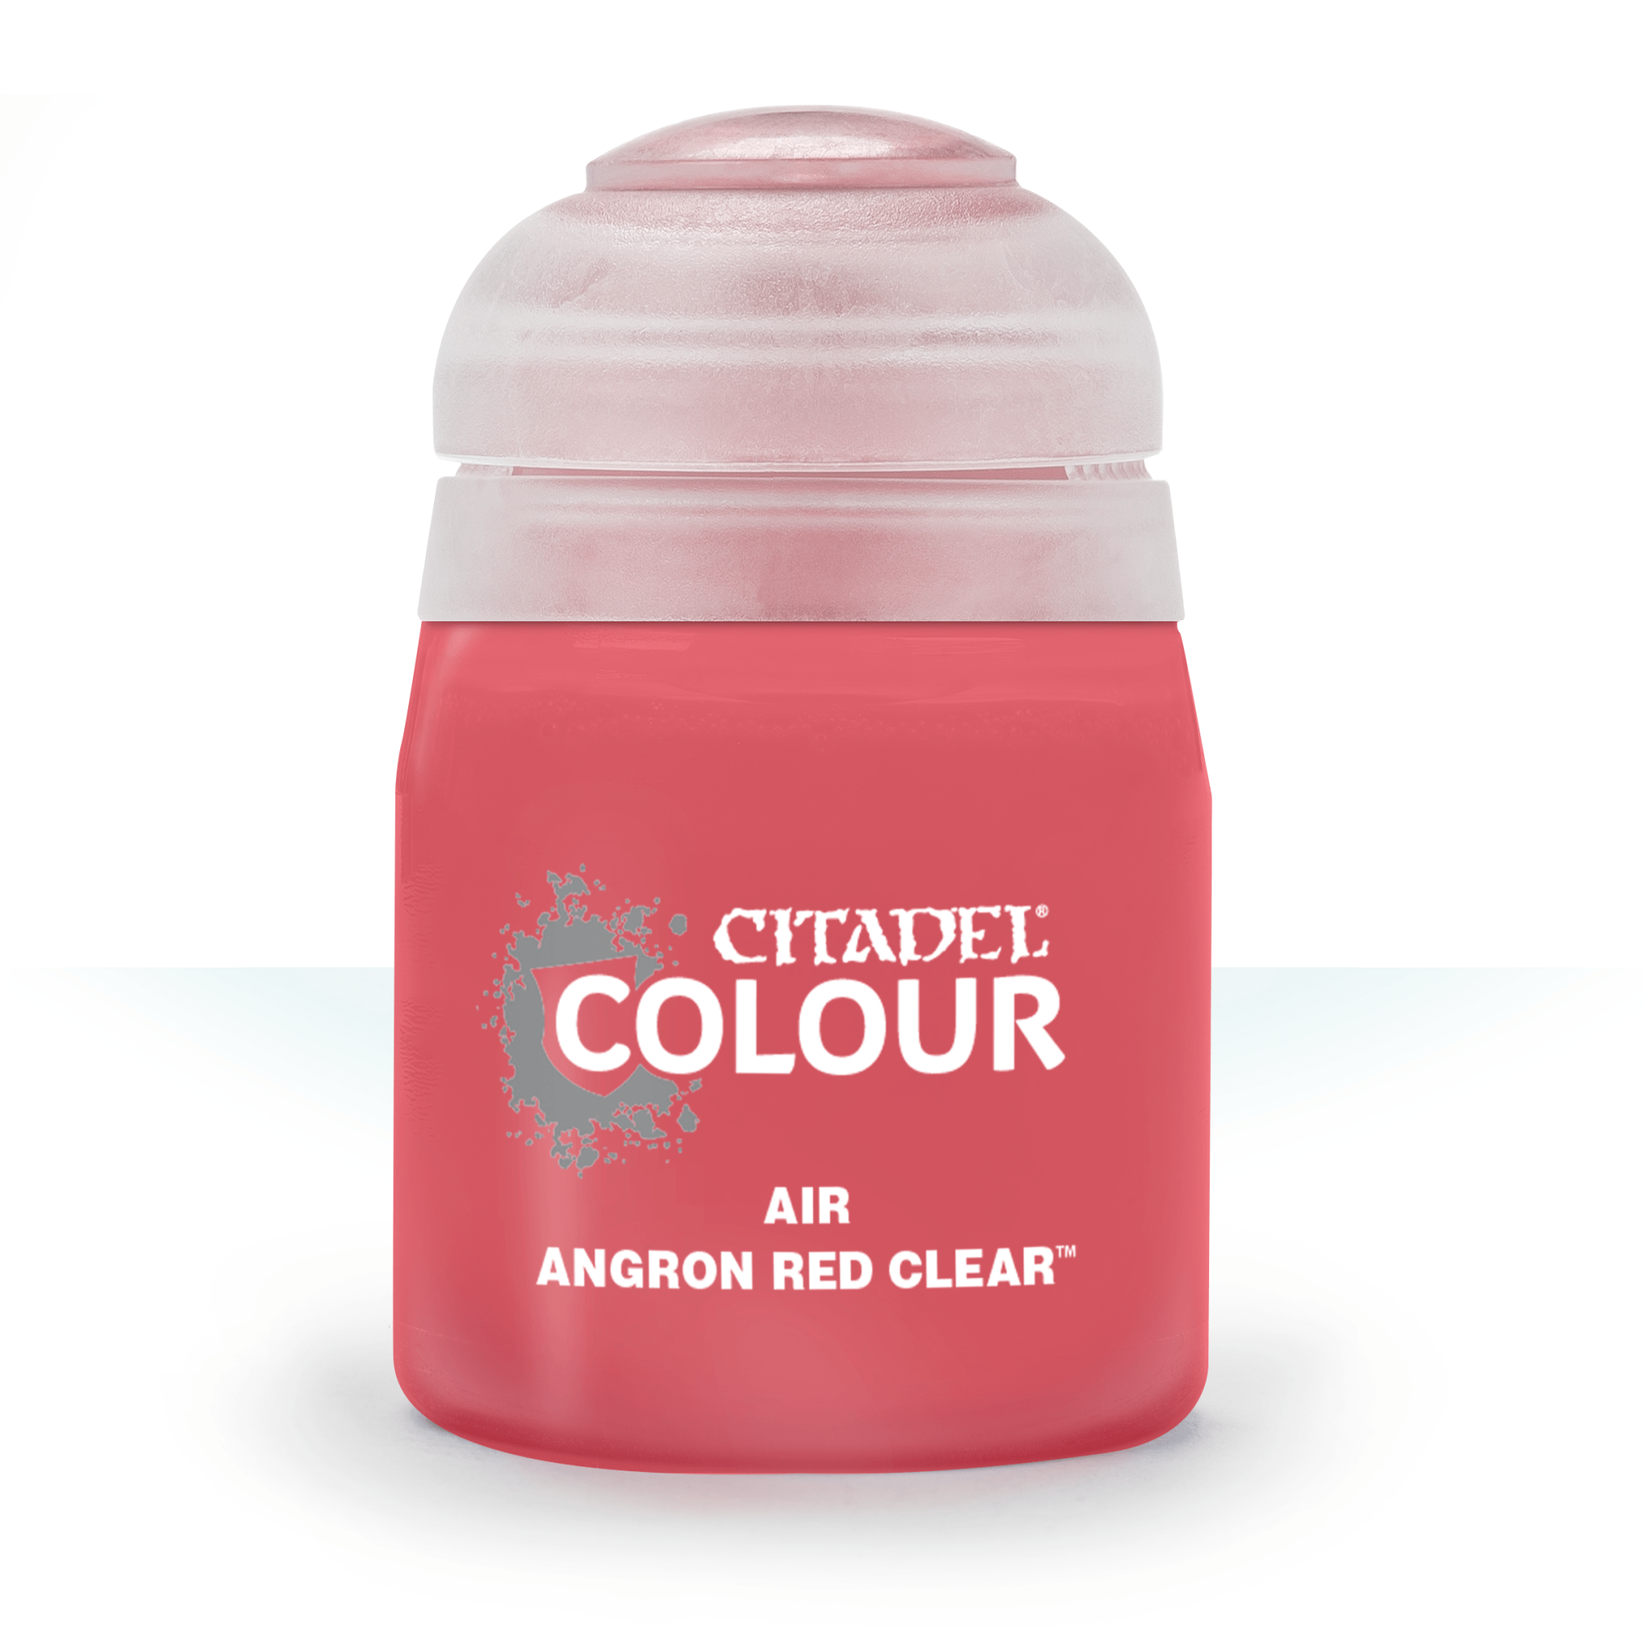 Citadel Angron Red Clear (Air 24ml)